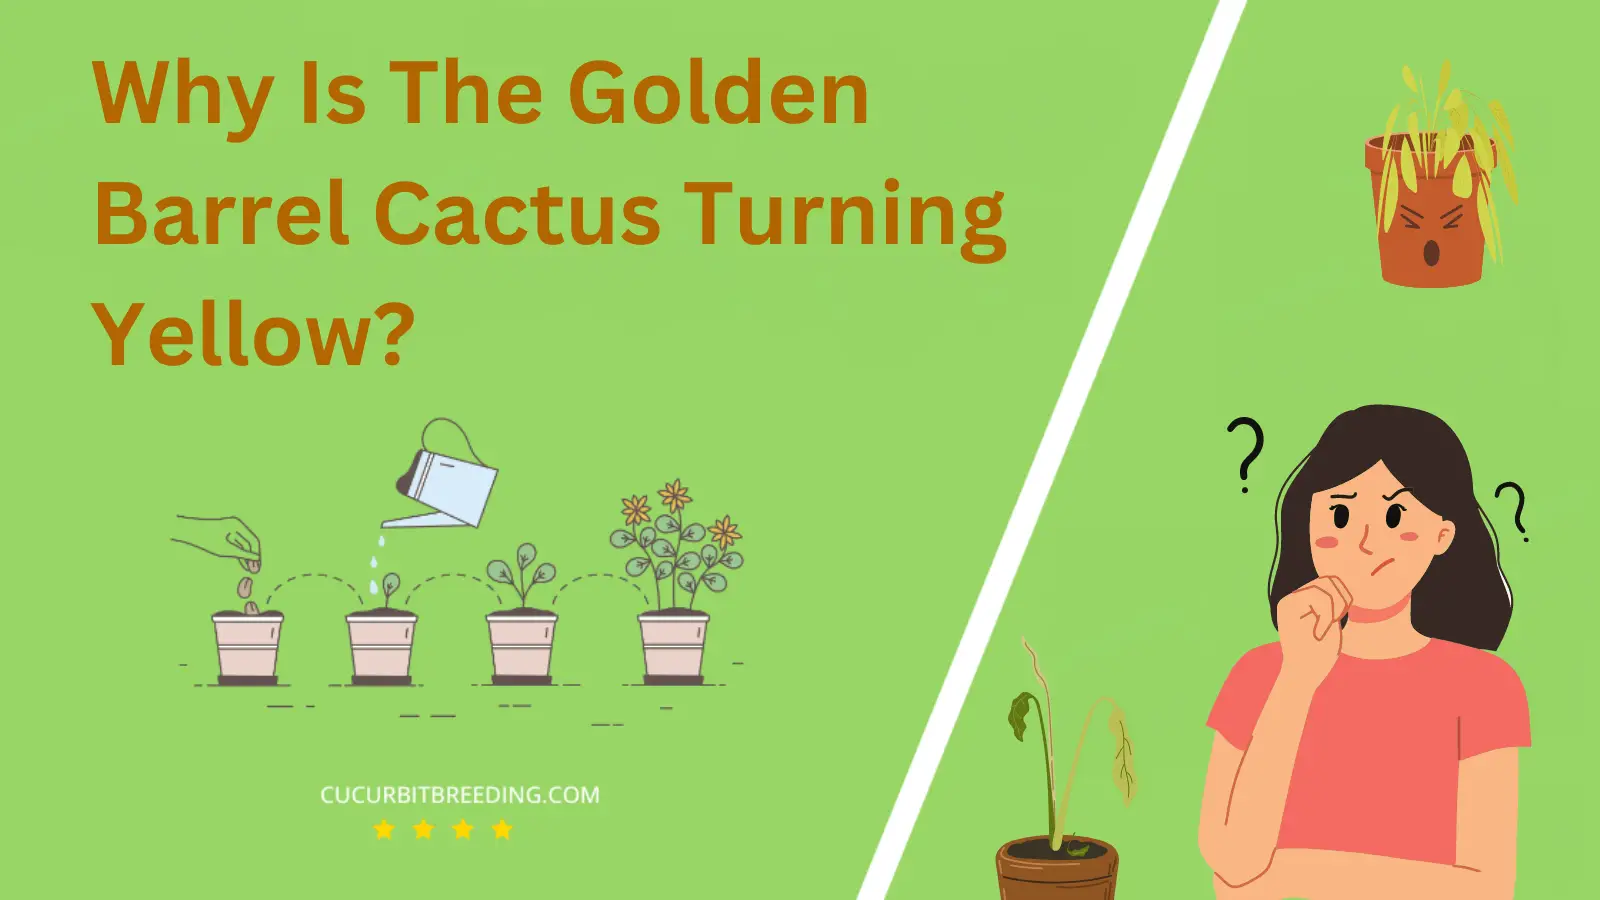 Why Is The Golden Barrel Cactus Turning Yellow